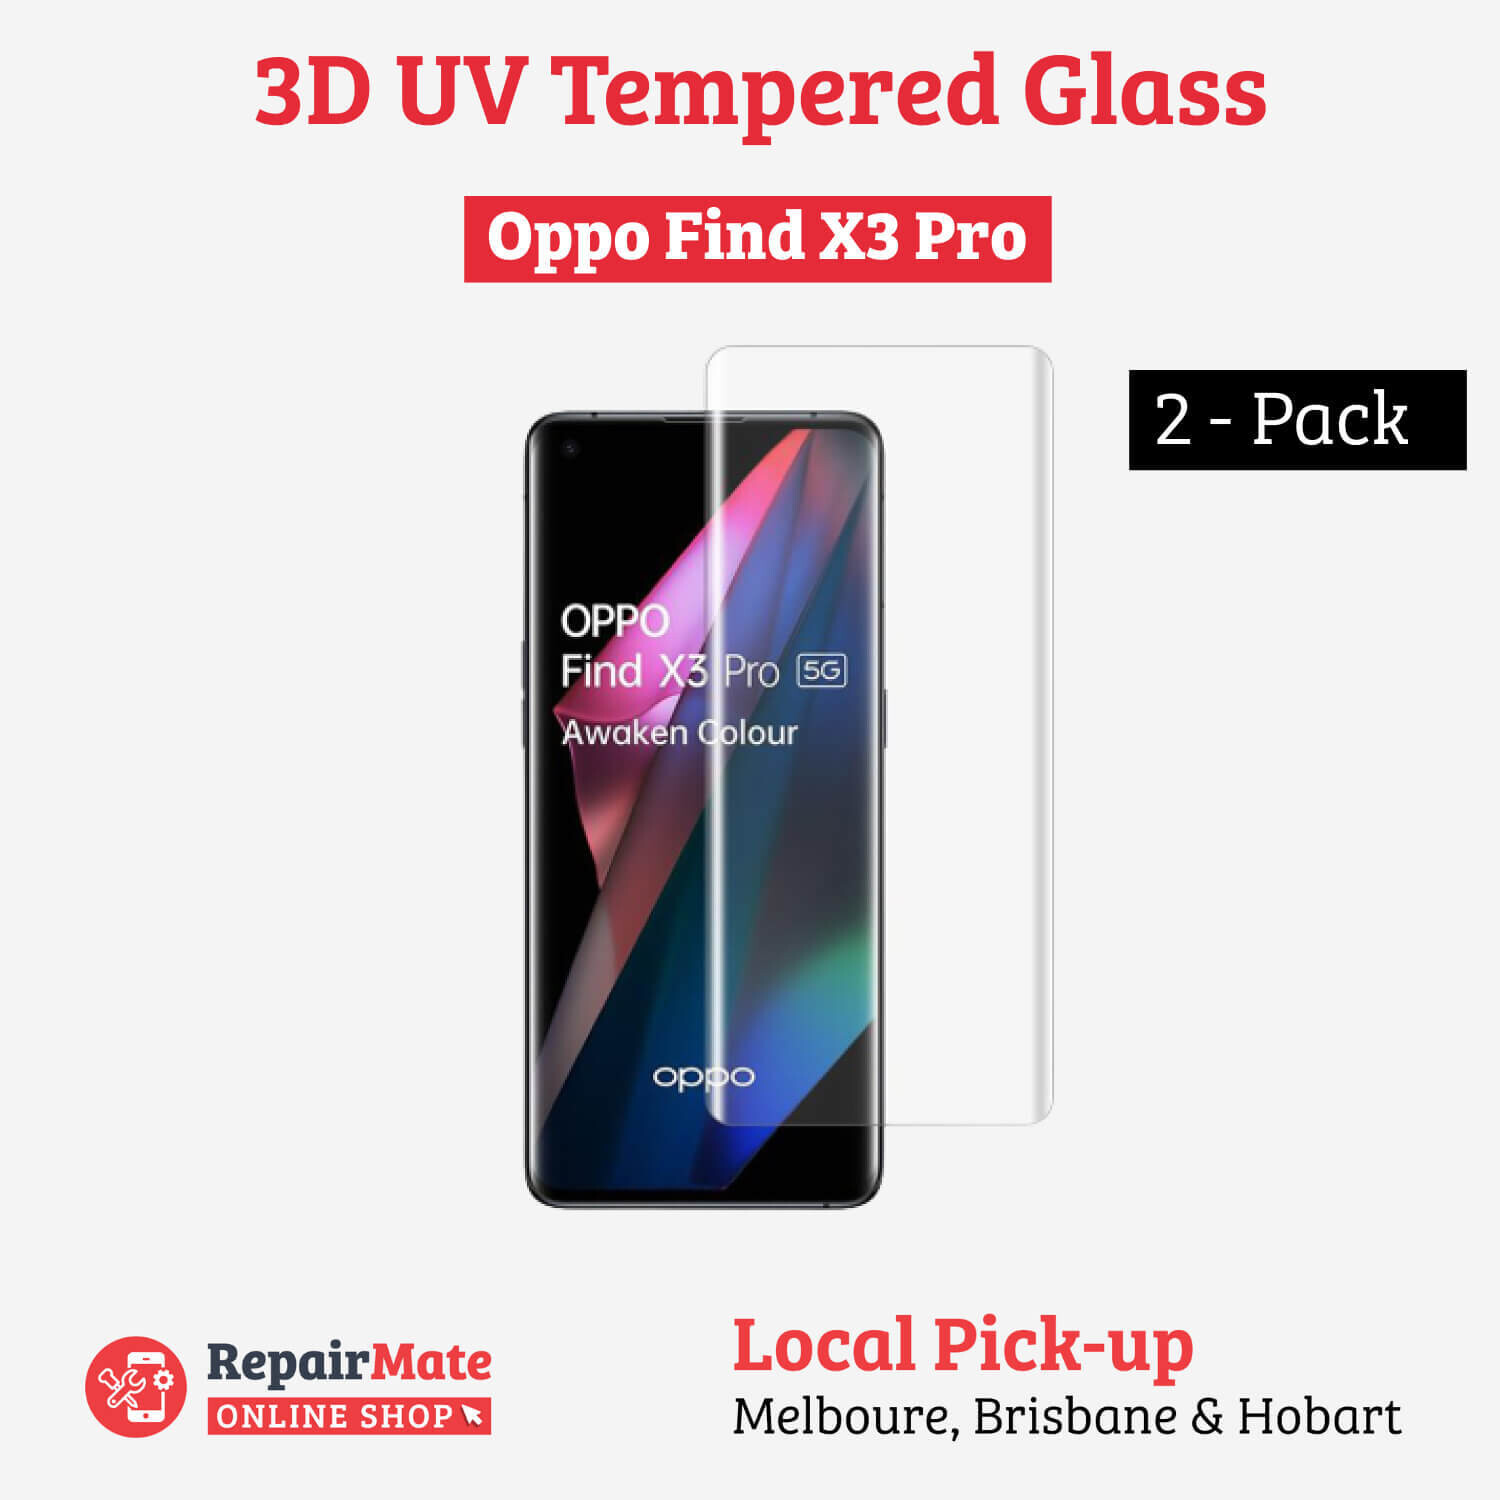 Oppo Find X3 Pro 3D UV Tempered Glass